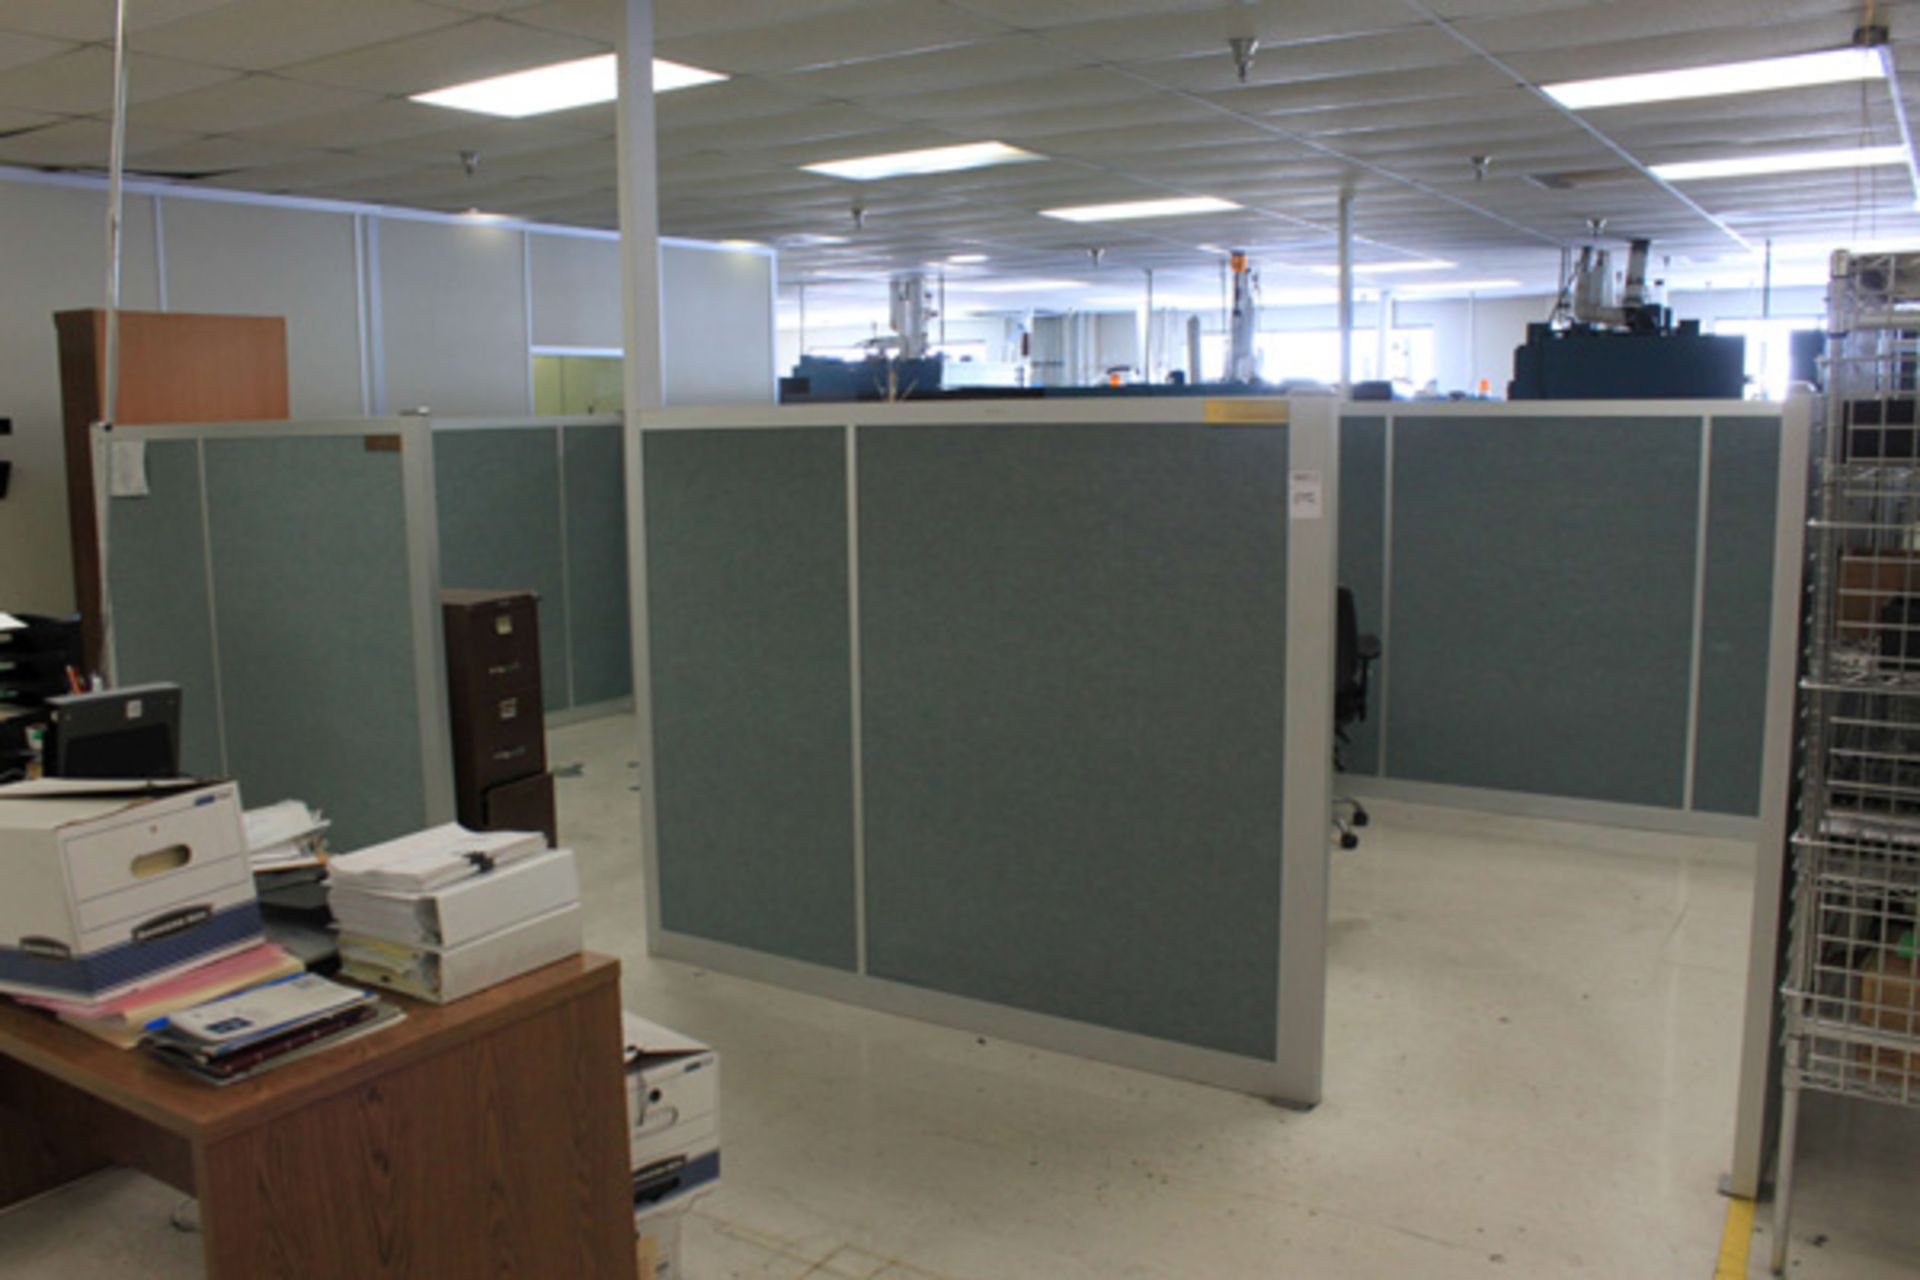 All Cubicles Throughout Lab Area